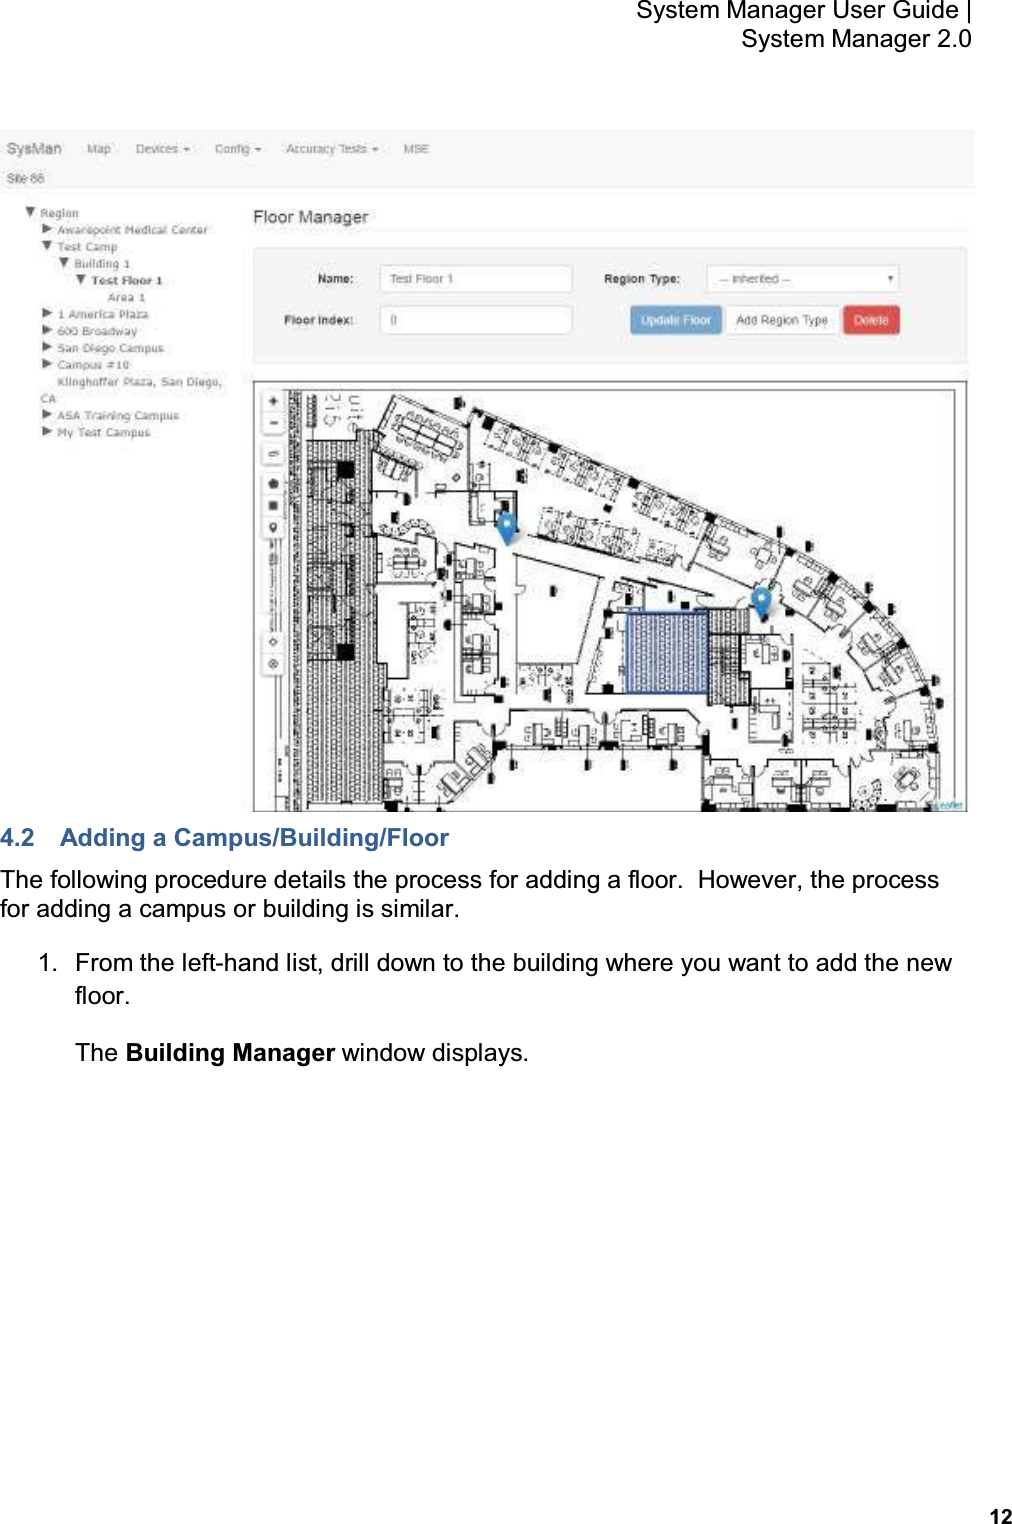           12 System Manager User Guide |  System Manager 2.0  4.2  Adding a Campus/Building/Floor The following procedure details the process for adding a floor.  However, the process for adding a campus or building is similar. 1.  From the left-hand list, drill down to the building where you want to add the new floor. The Building Manager window displays. 